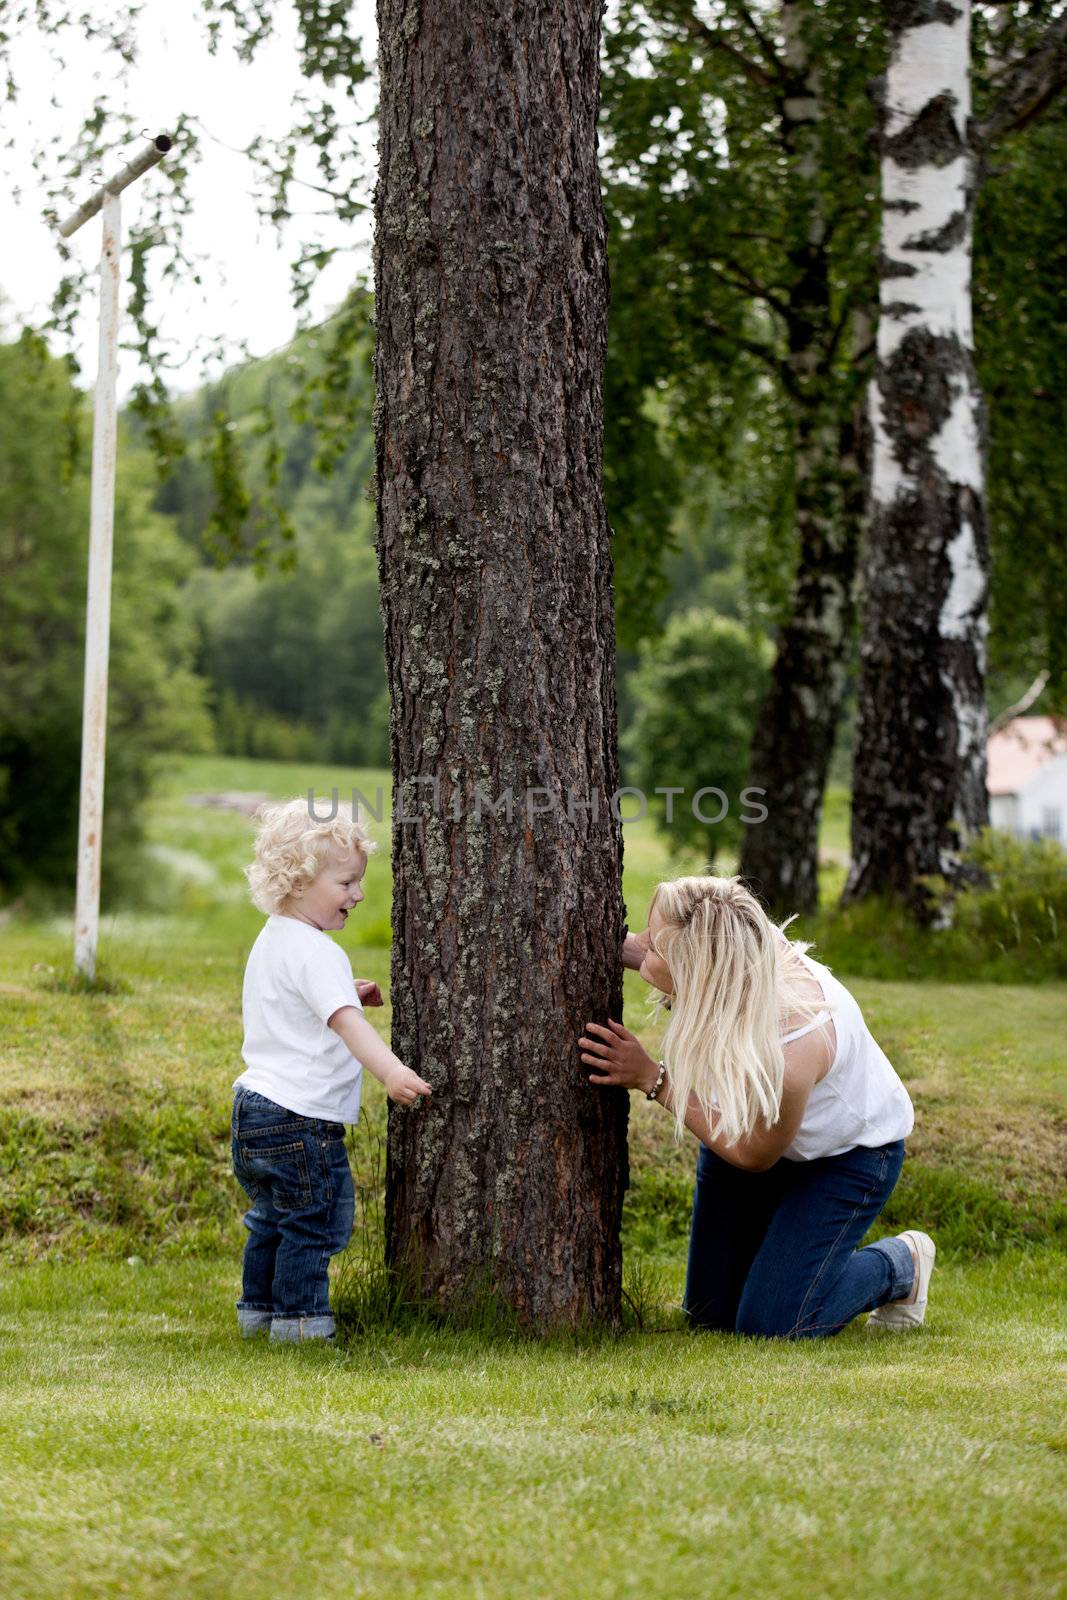 Mother and son playing hide and seek outdoors in a rural setting